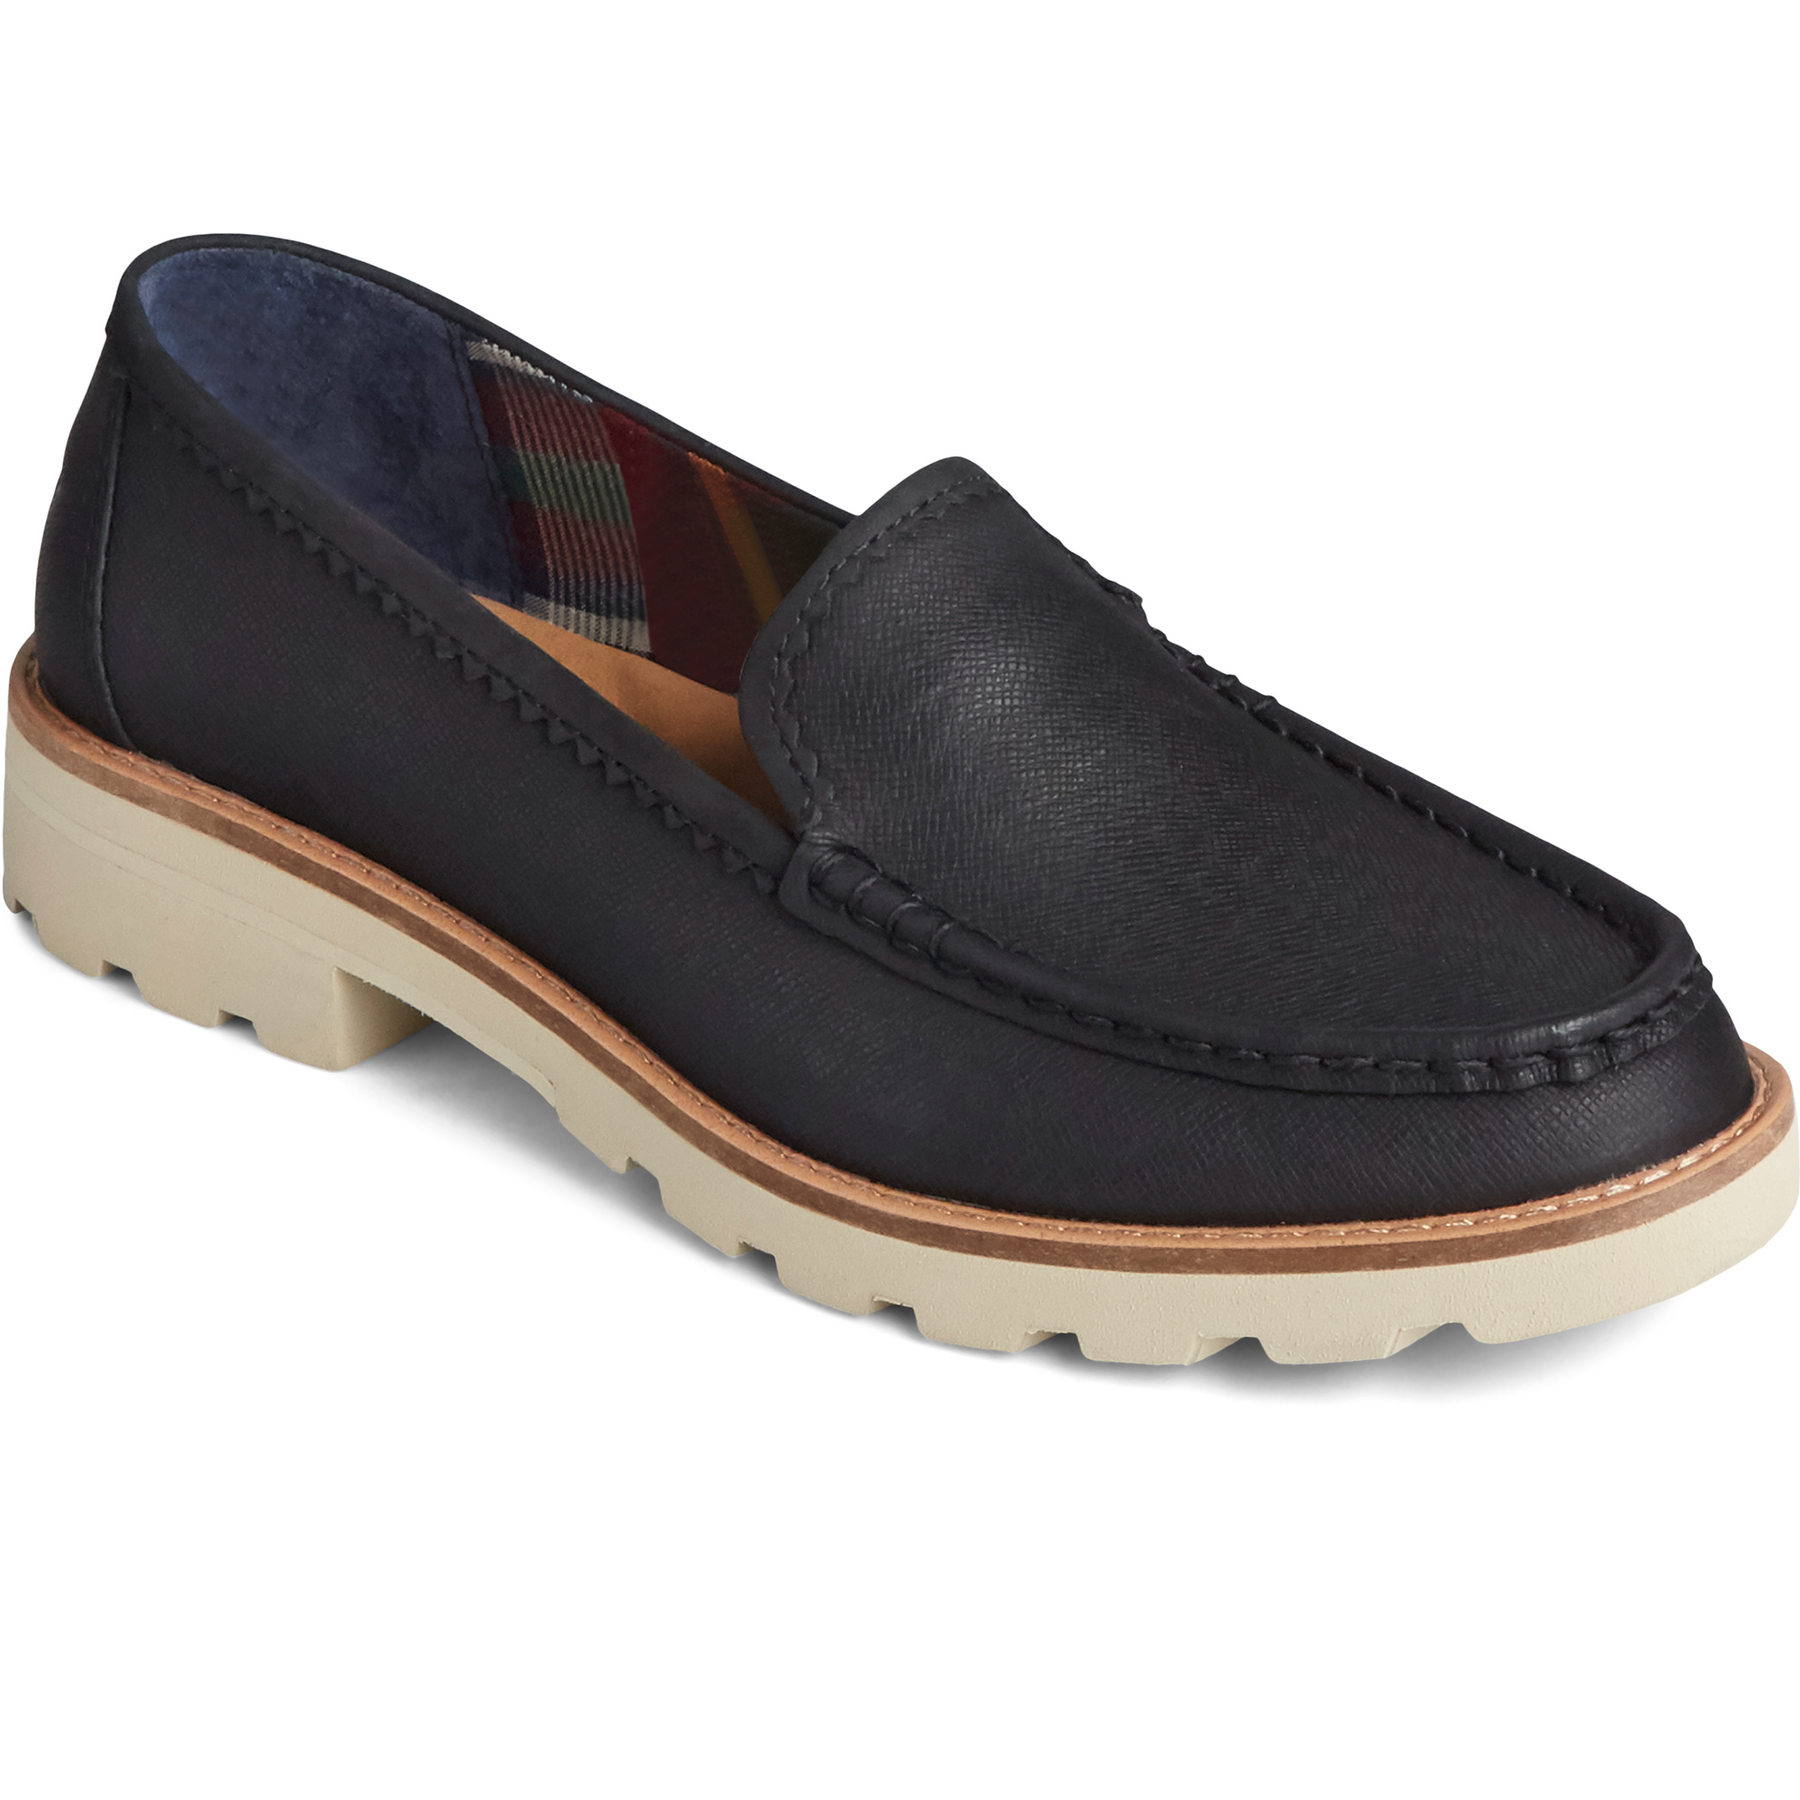 Women's Authentic Original Leather Lug Loafer - Black (STS85611)